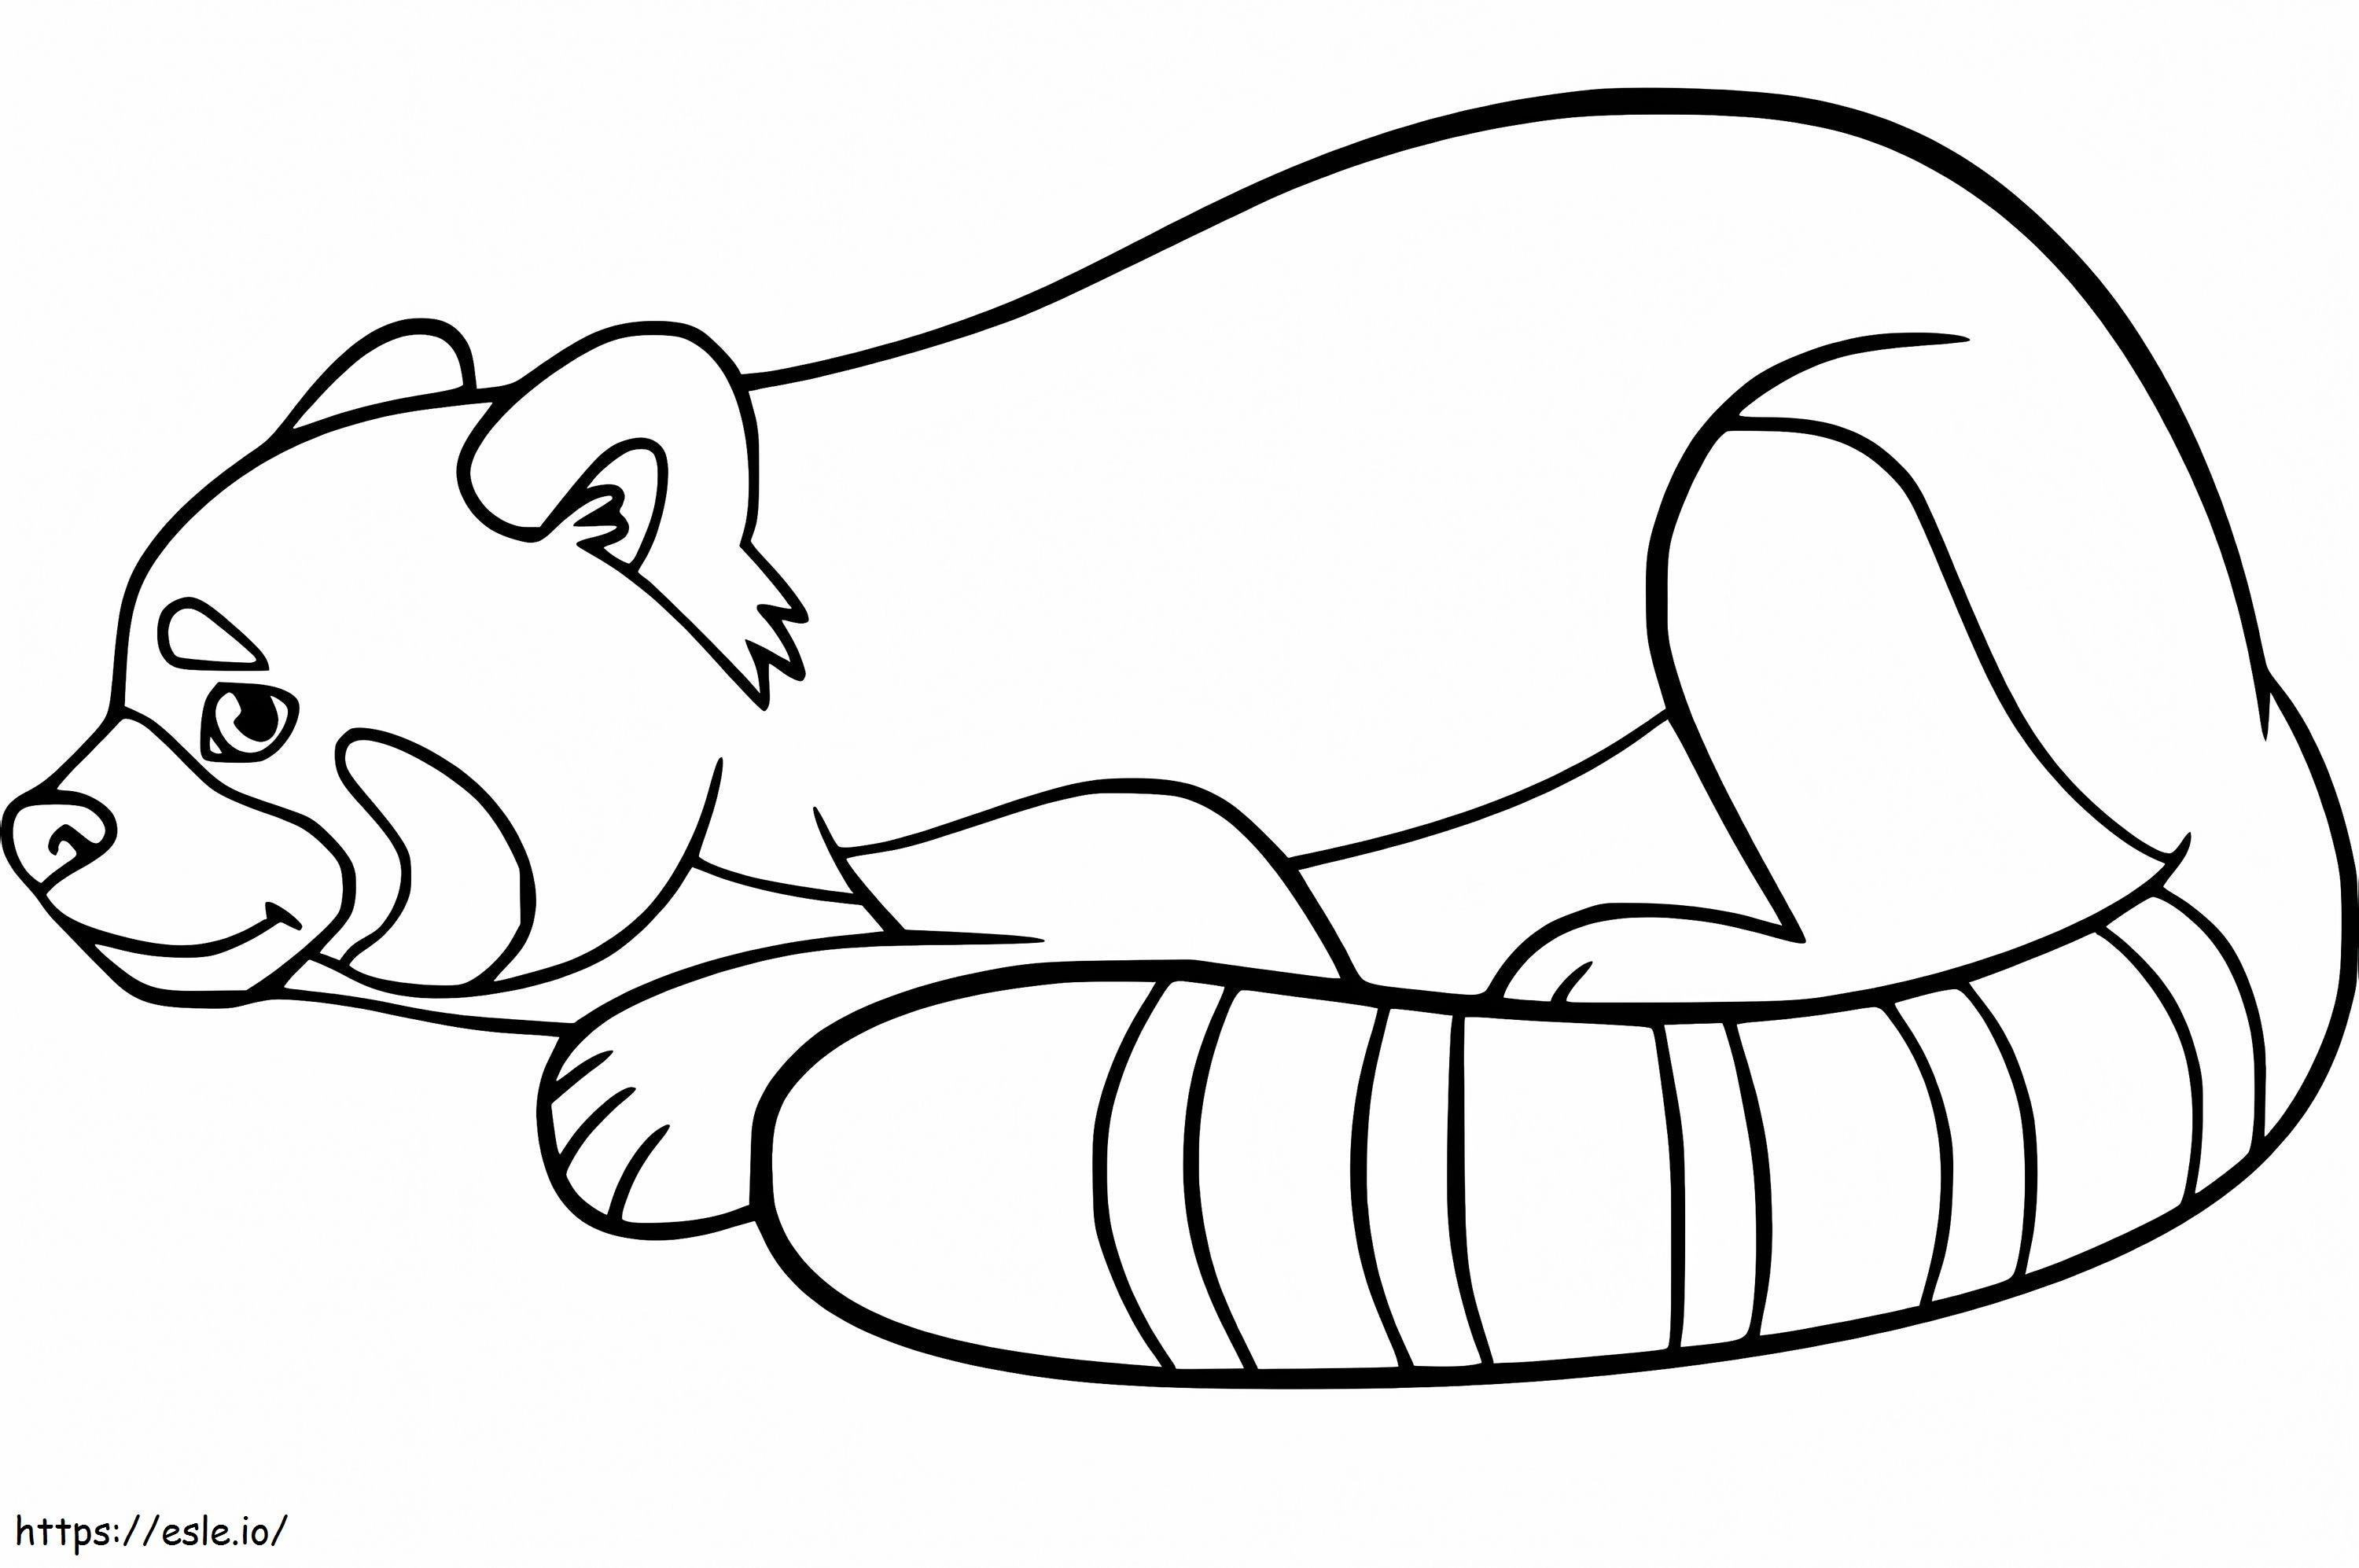 Red Panda On Ground coloring page